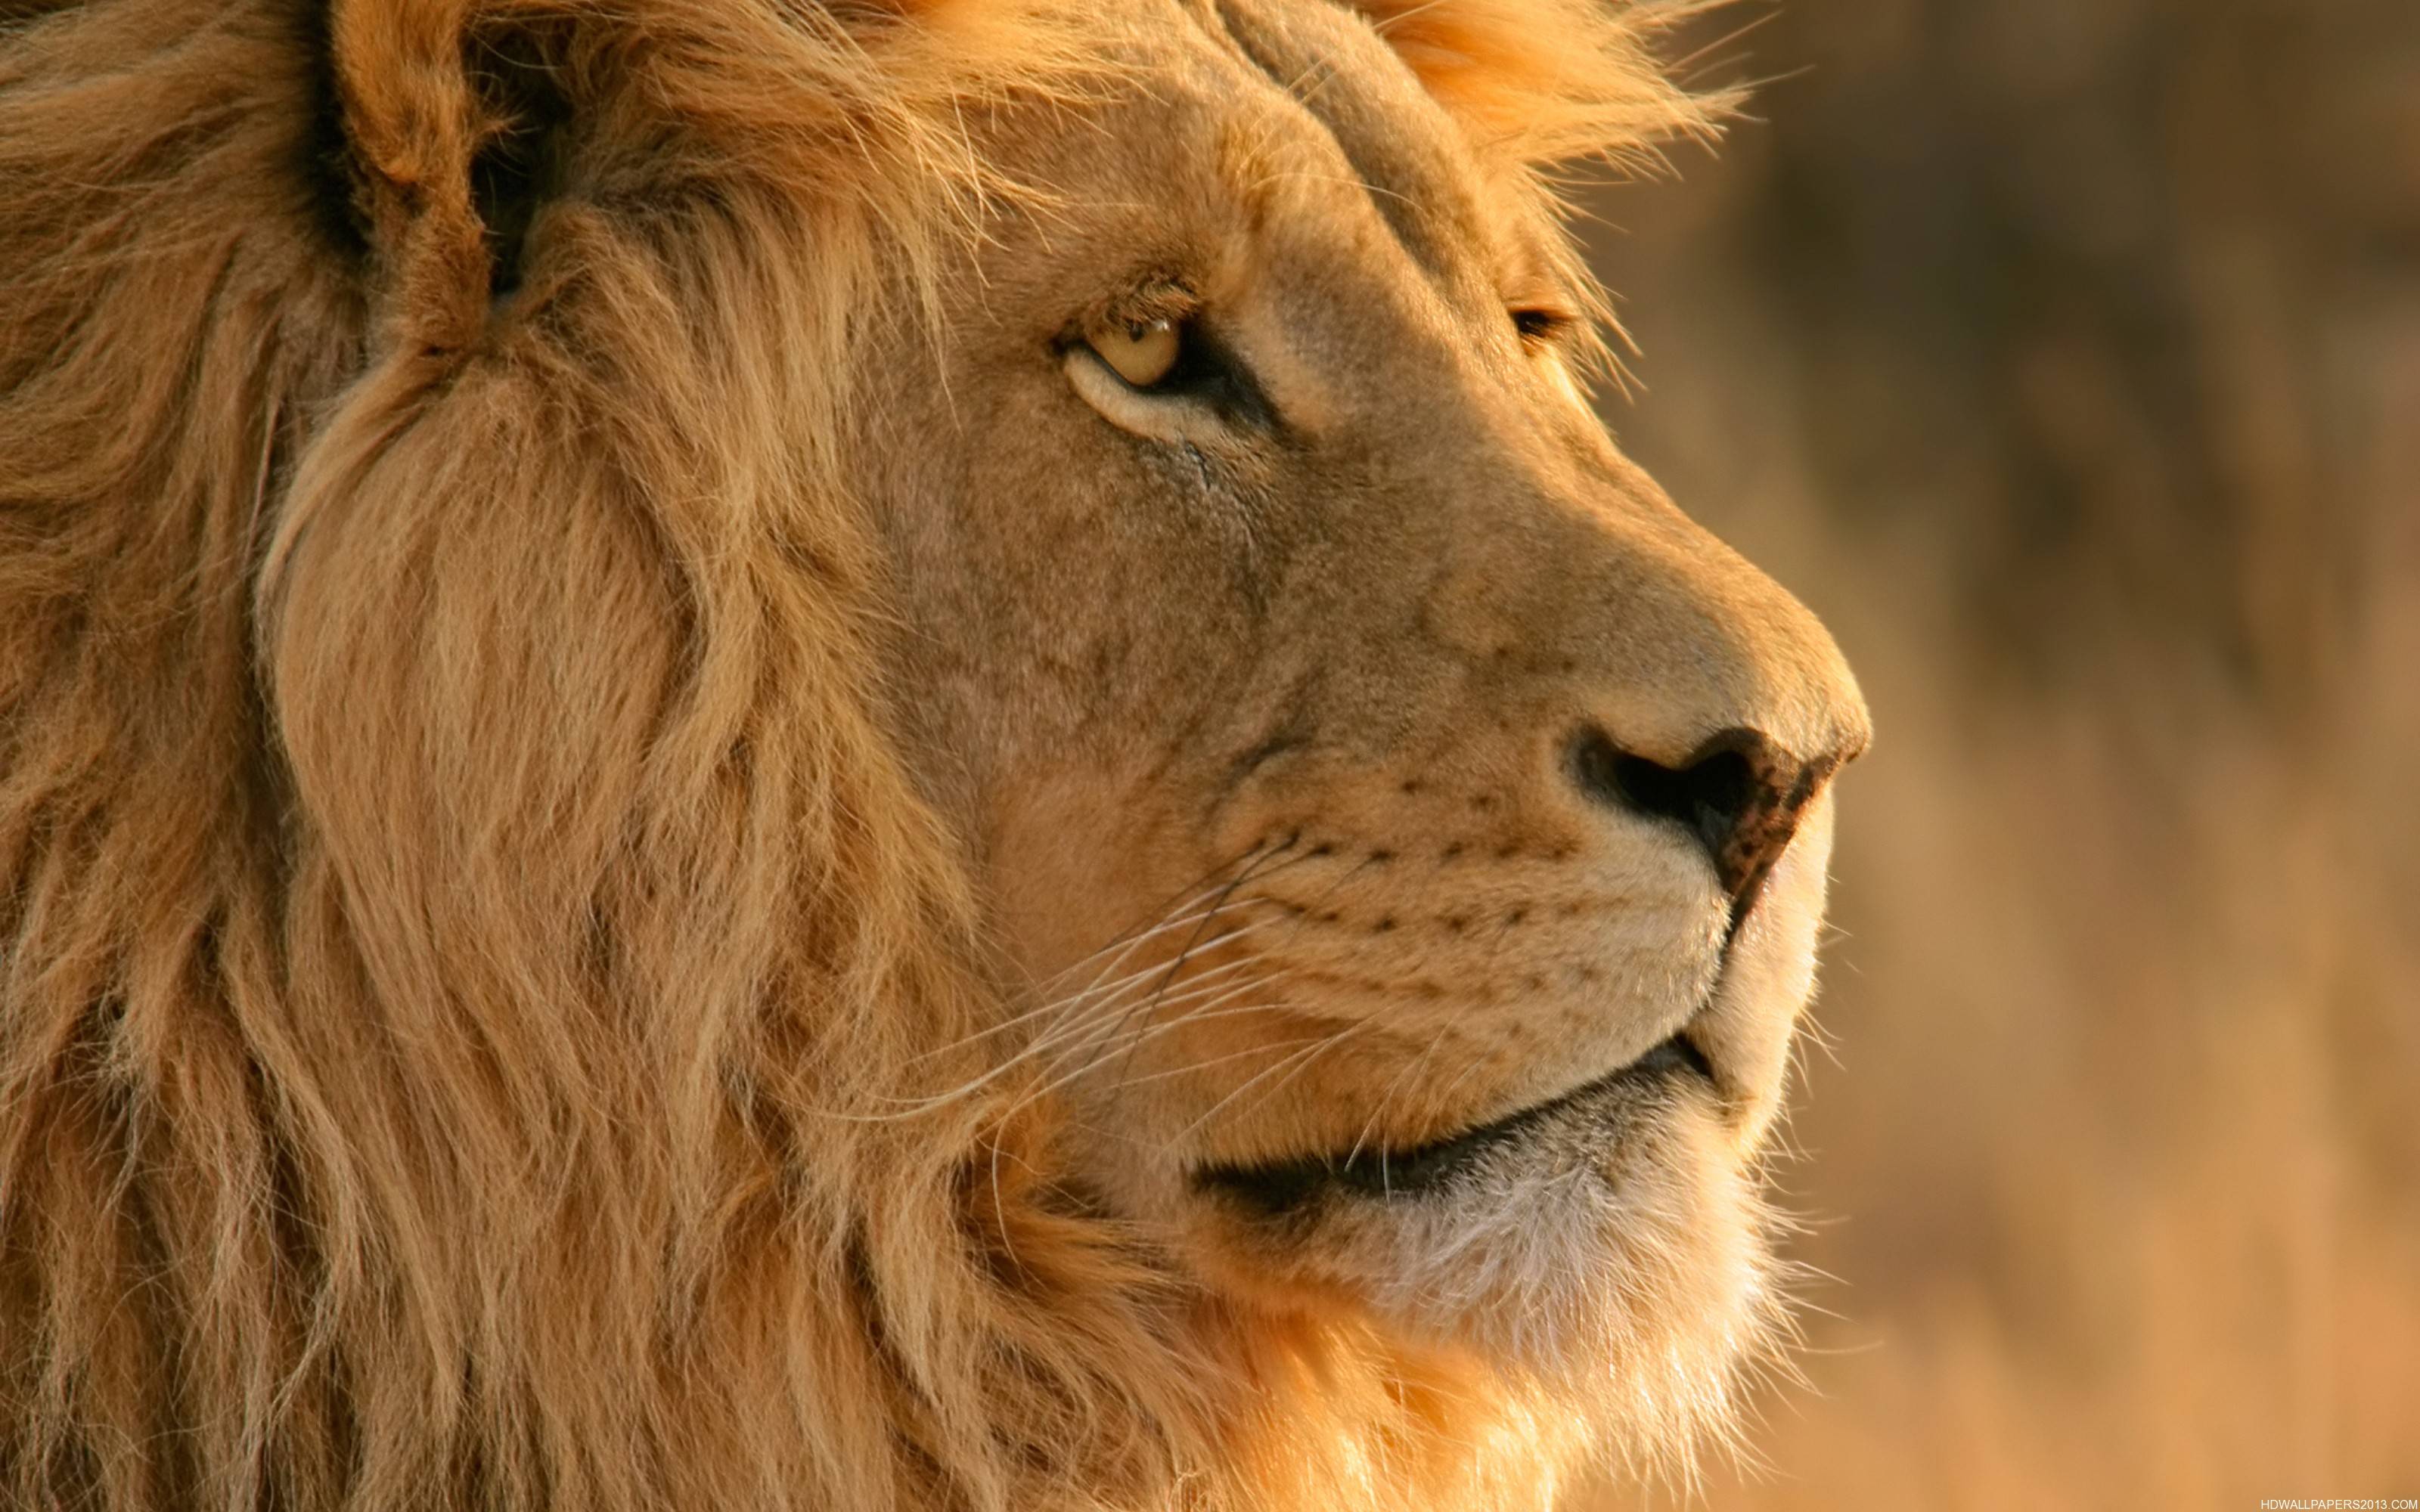 Lion face. High Definition Wallpaper, High Definition Background